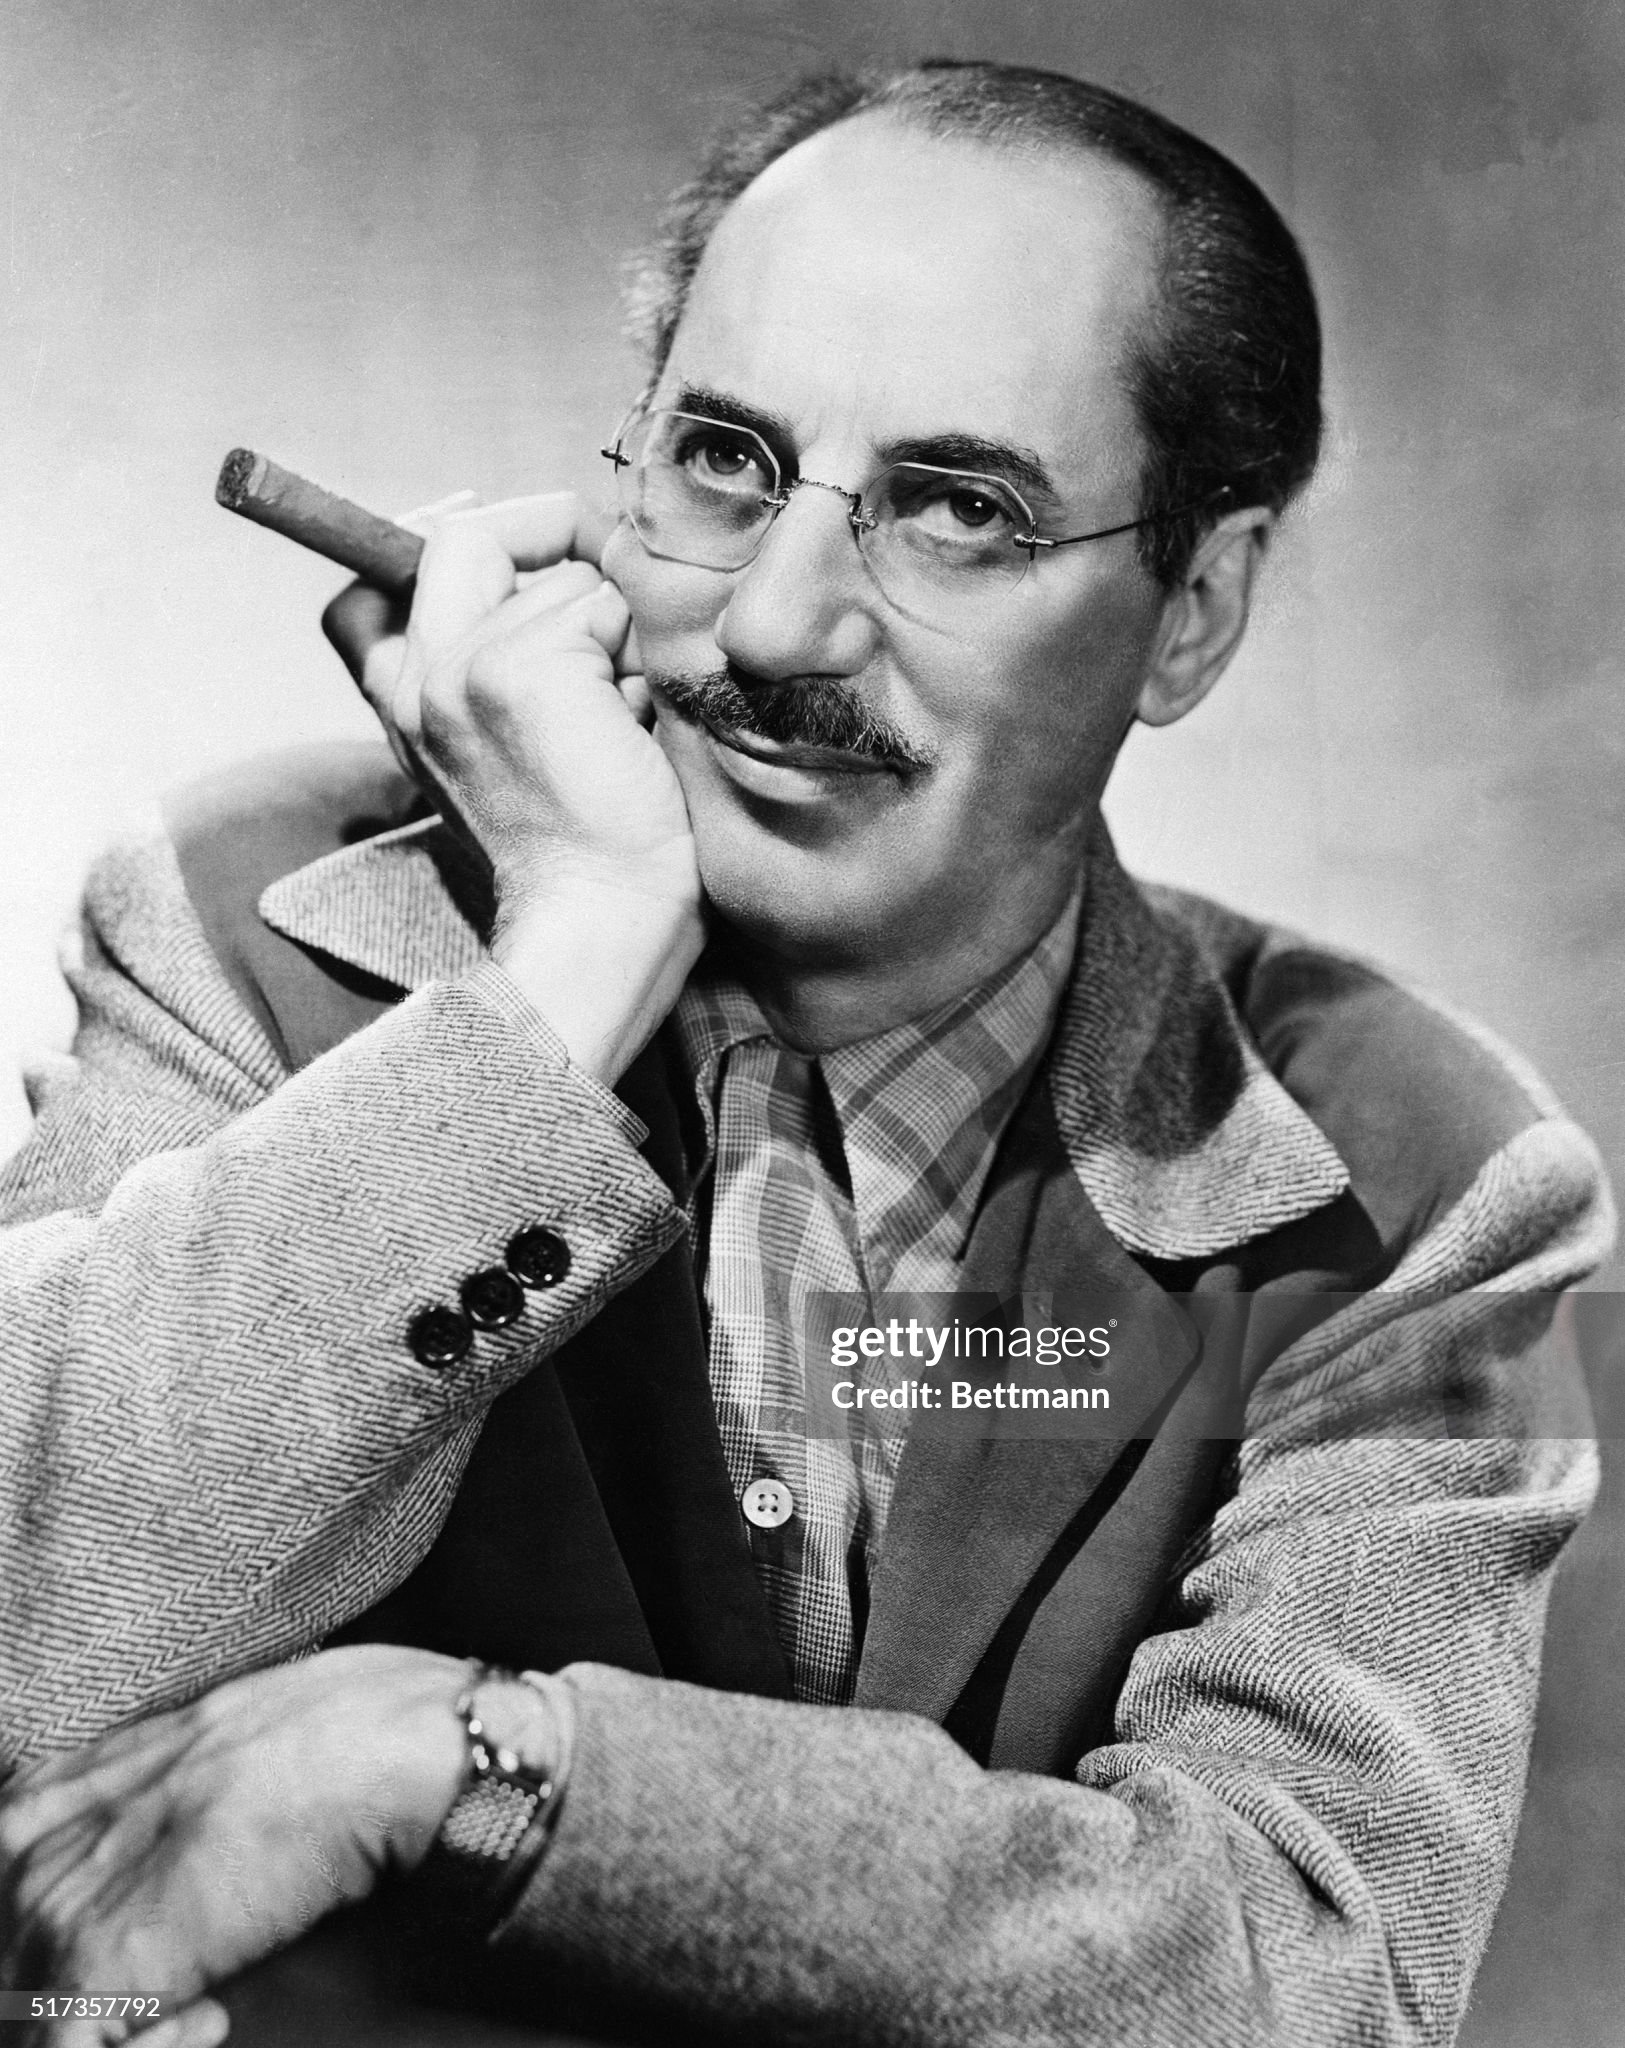 ¿Cuánto mide Groucho Marx? - Altura - Real height 11-21-52-hollywood-california-portrait-of-screen-and-television-groucho-marx